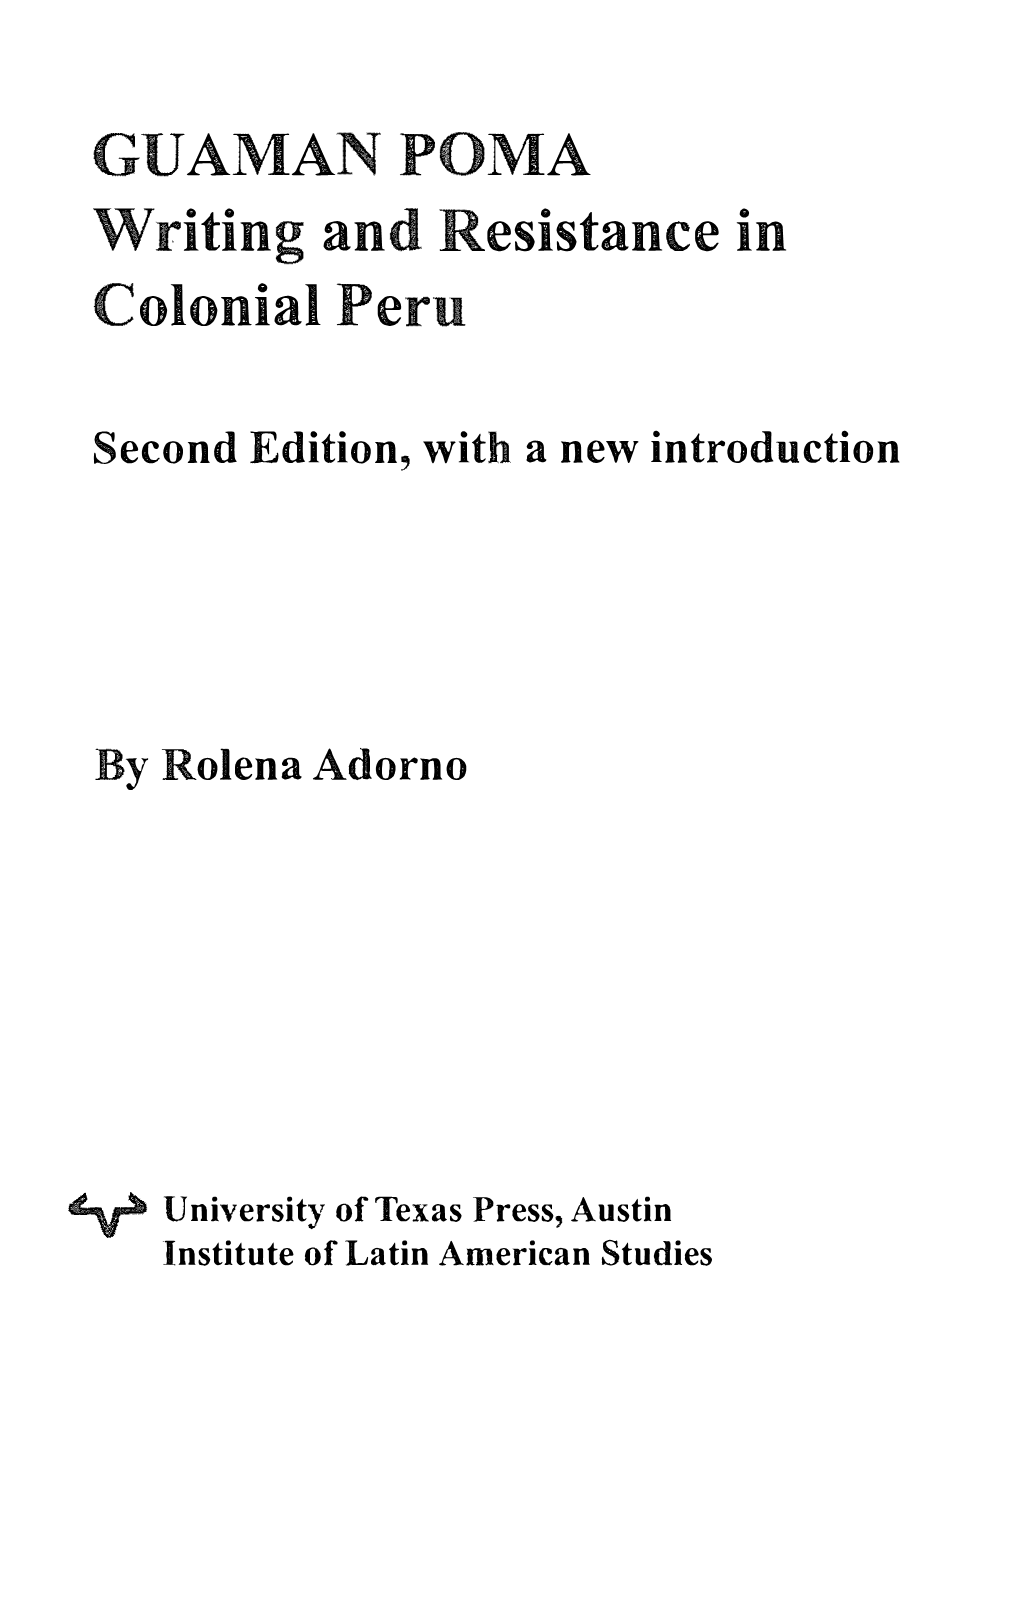 GUAMAN POMA Writing and Resistance in Colonial Peru